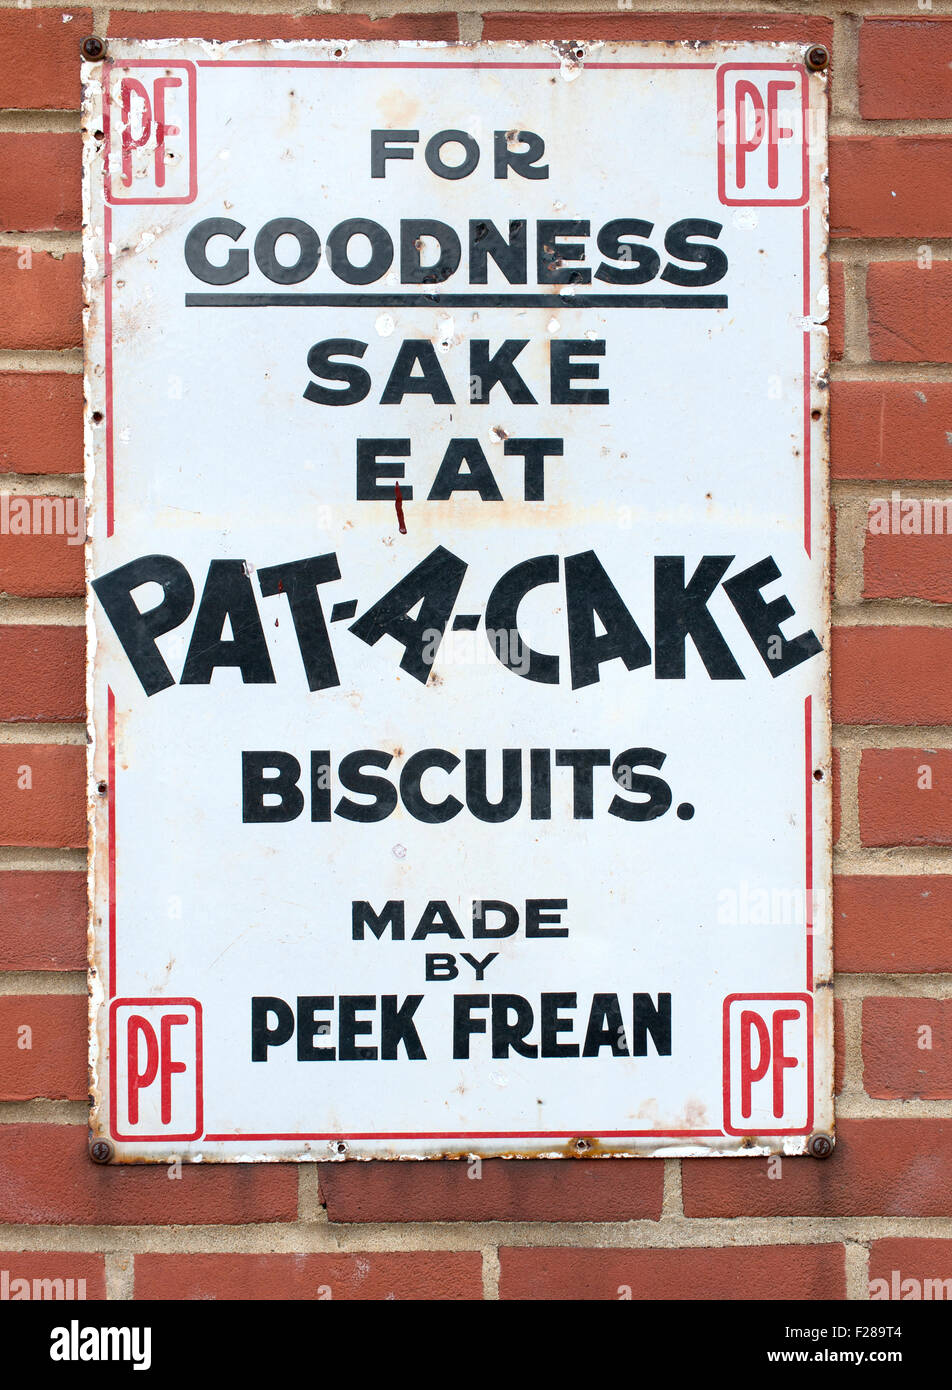 Peek Frean vintage metal advertisement for Pat-a-Cake biscuits. Stock Photo